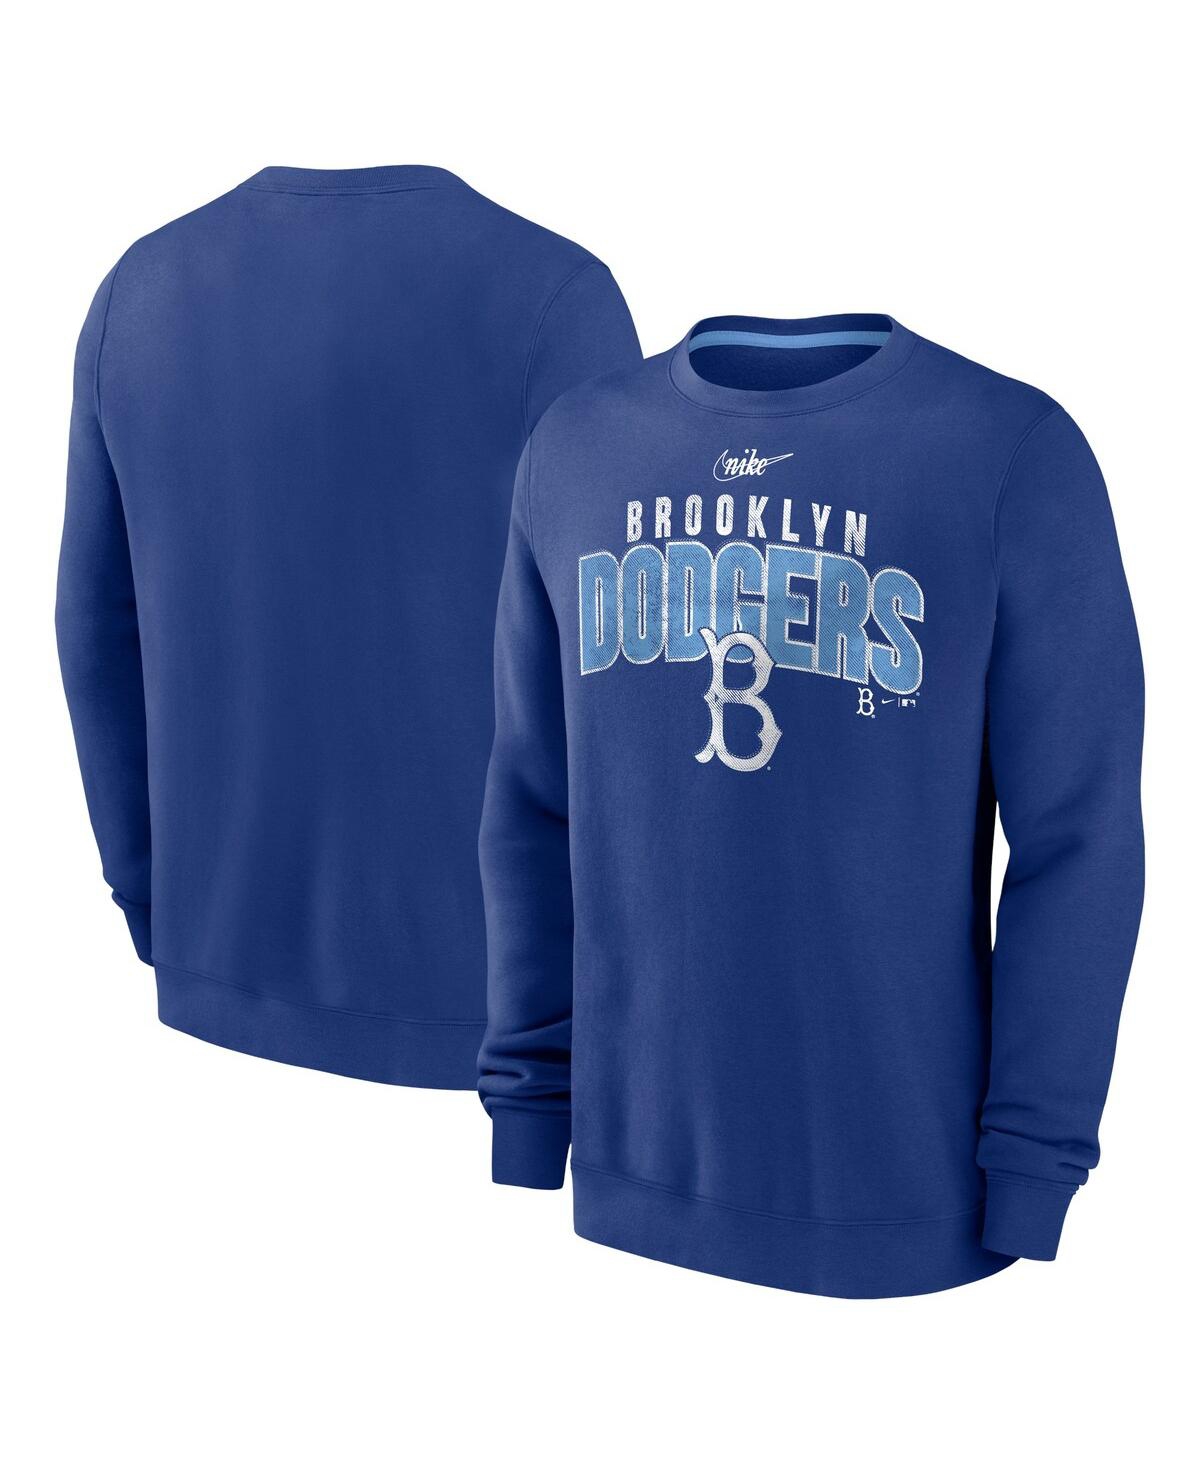 Nike Men's  Royal Brooklyn Dodgers Cooperstown Collection Team Shout Out Pullover Sweatshirt